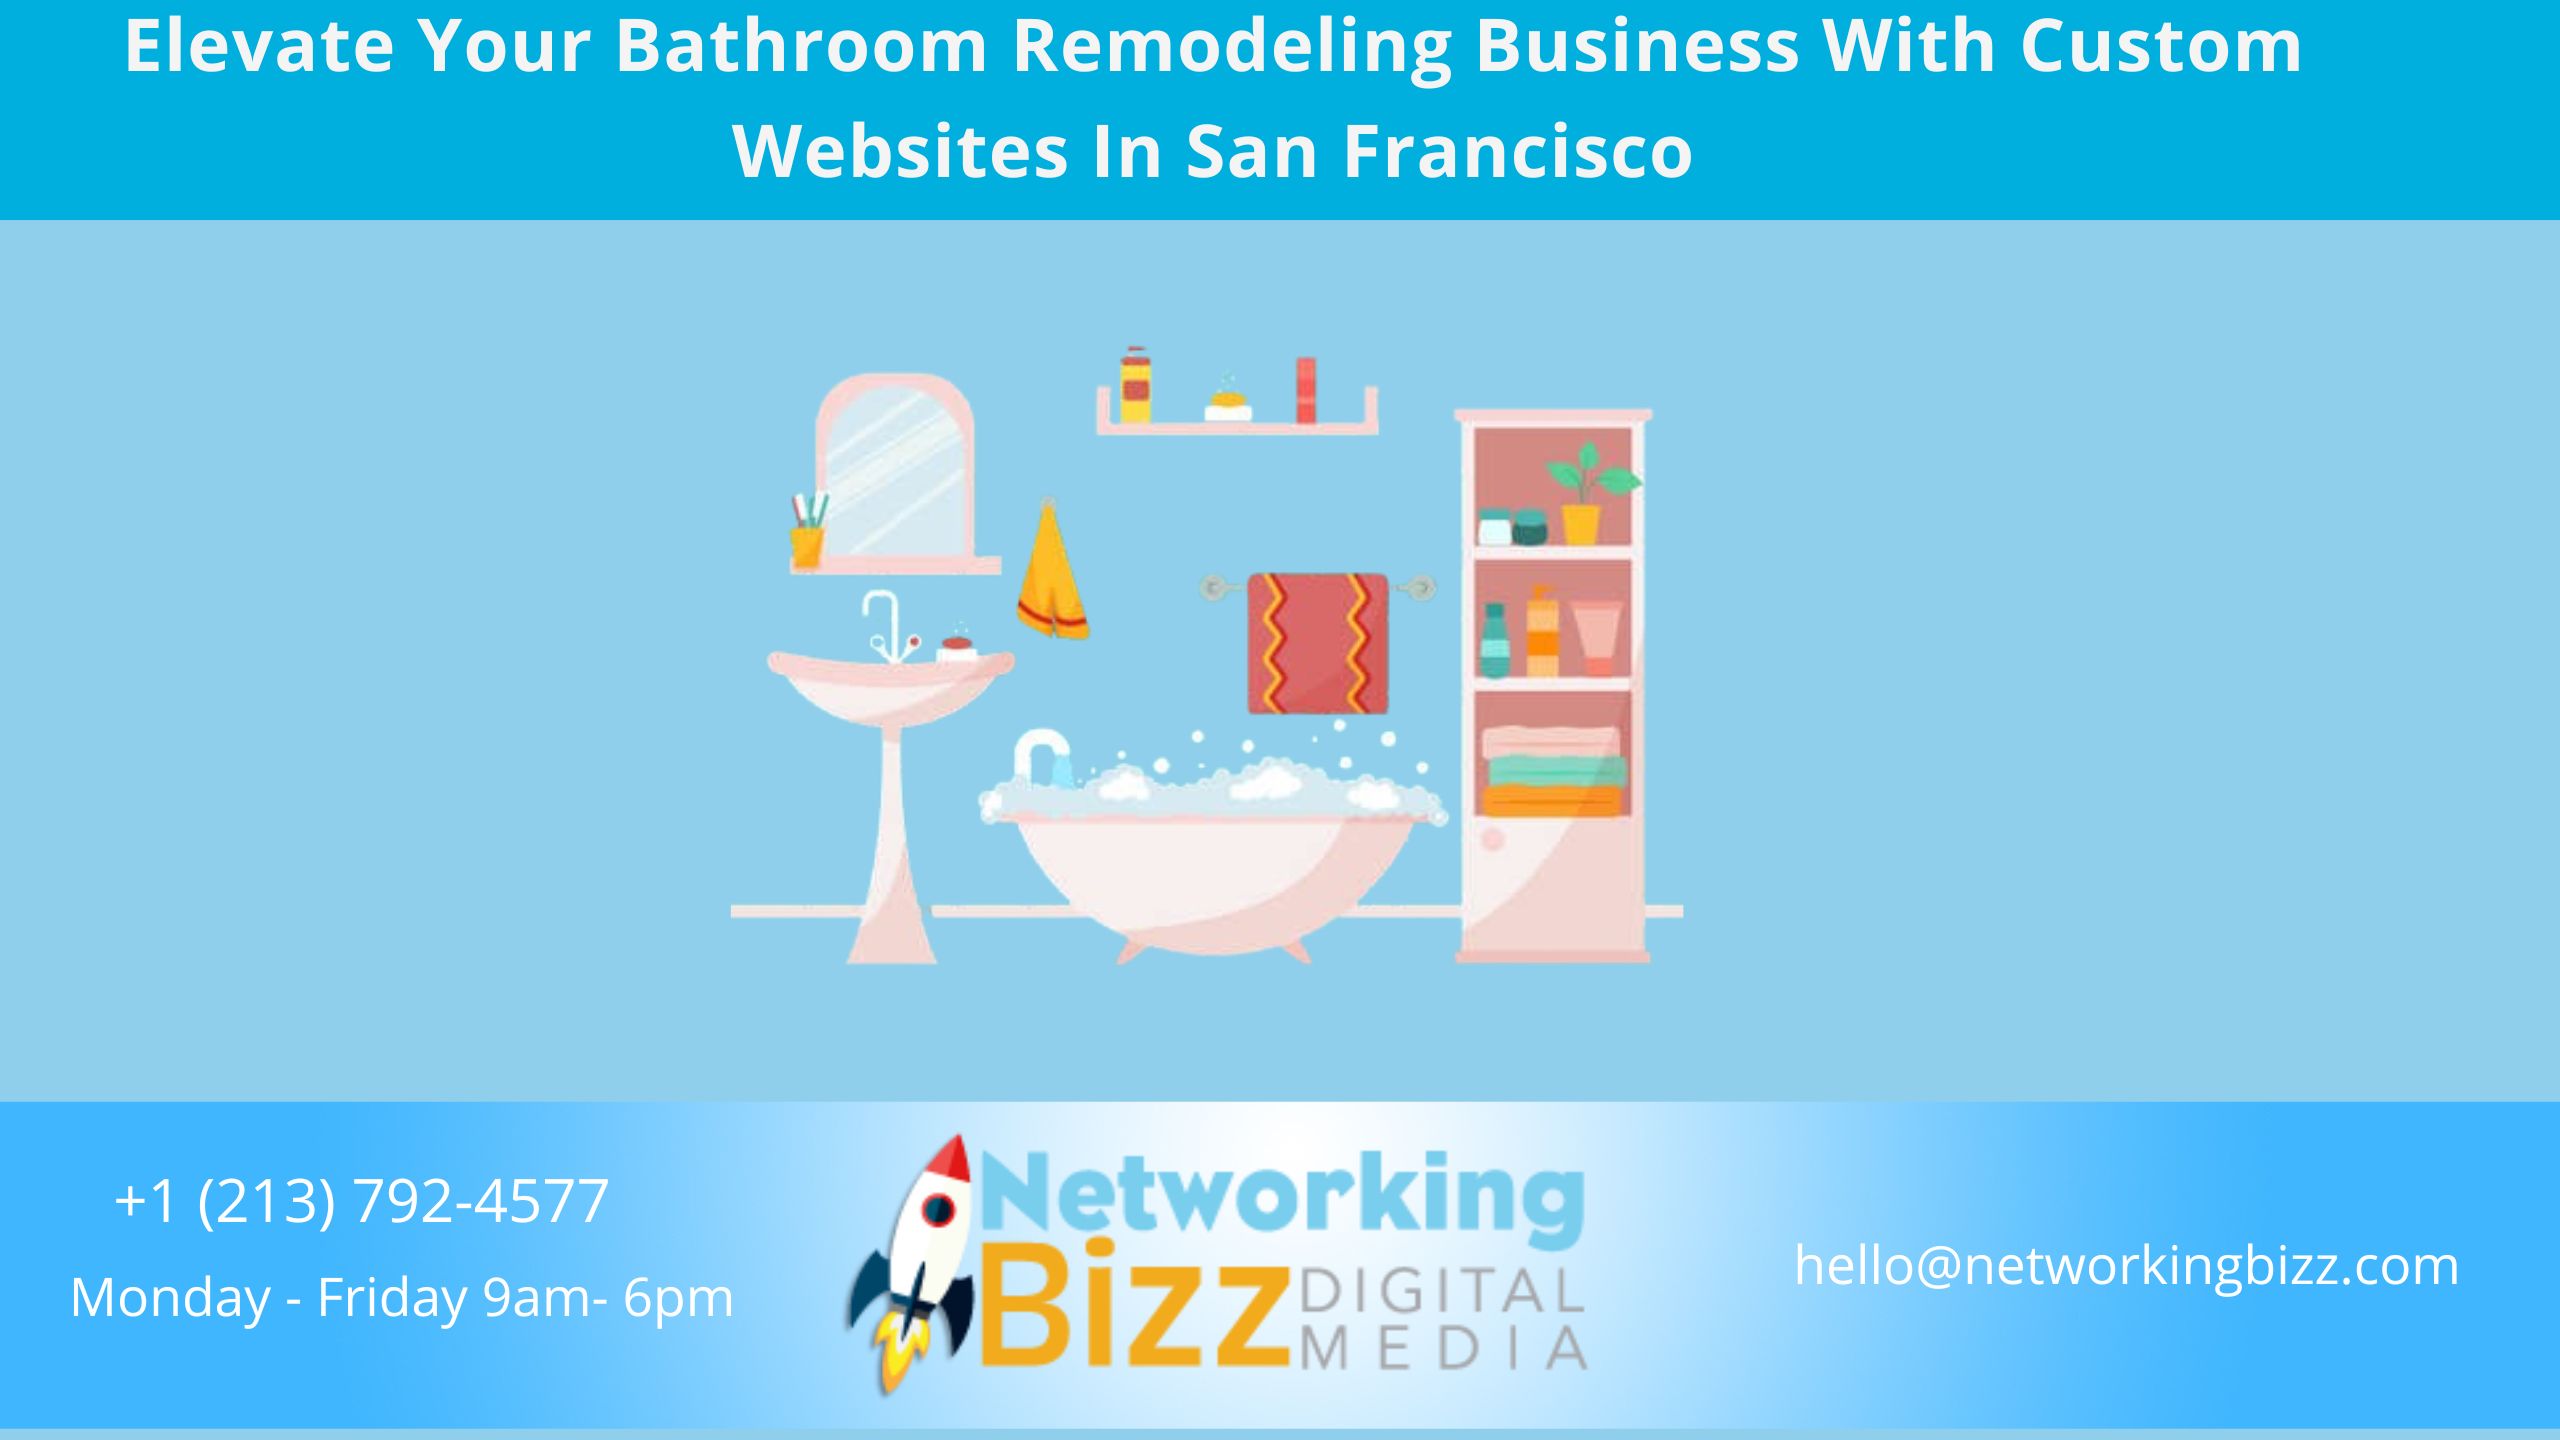 Elevate Your Bathroom Remodeling Business With Custom Websites In San Francisco  